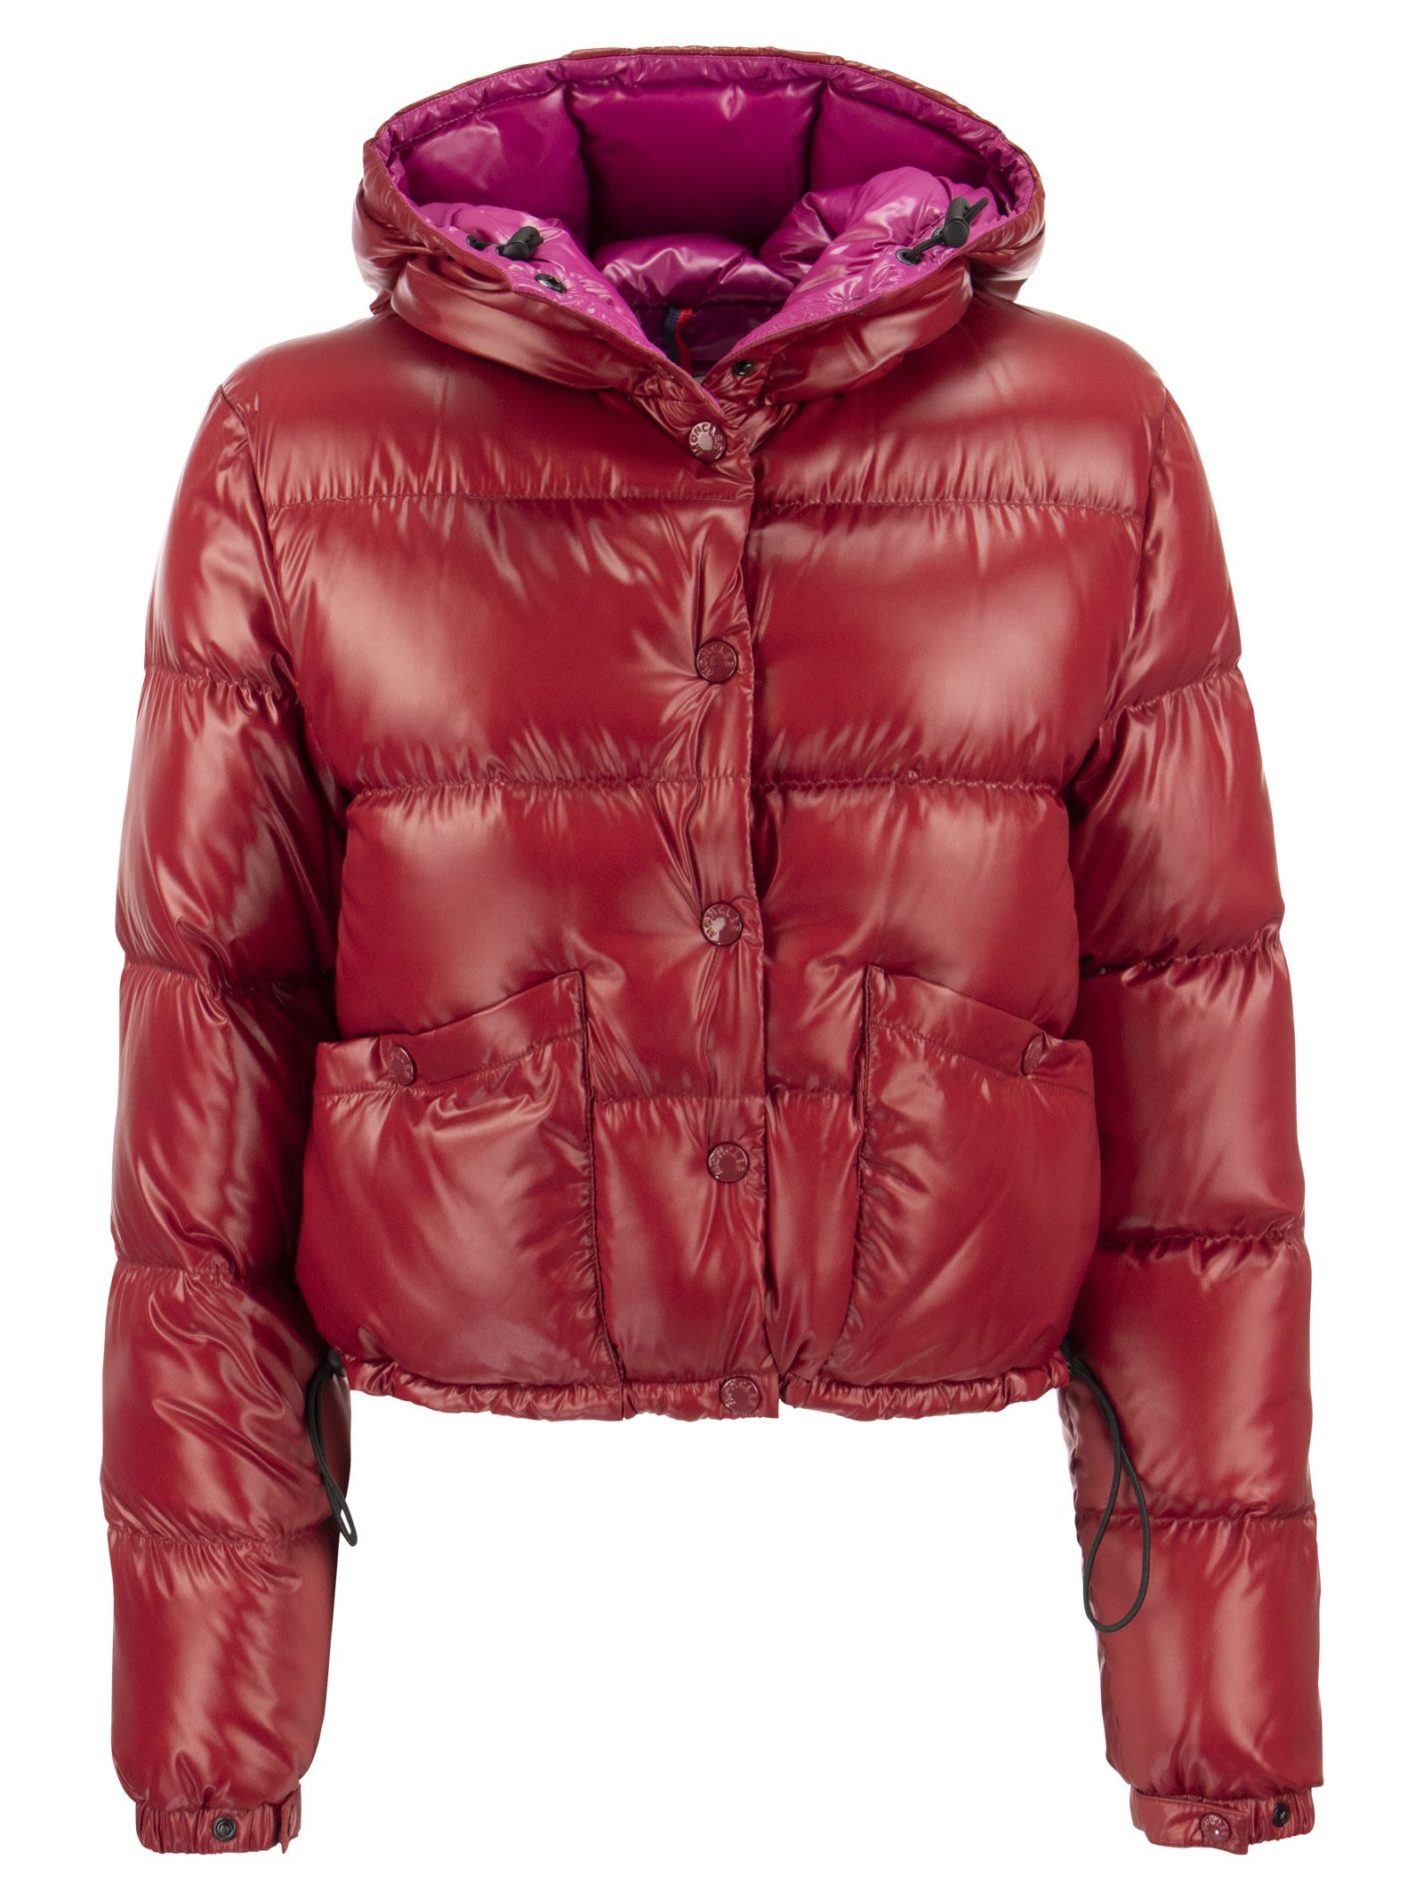 BARDANETTE - Short down jacket hood with